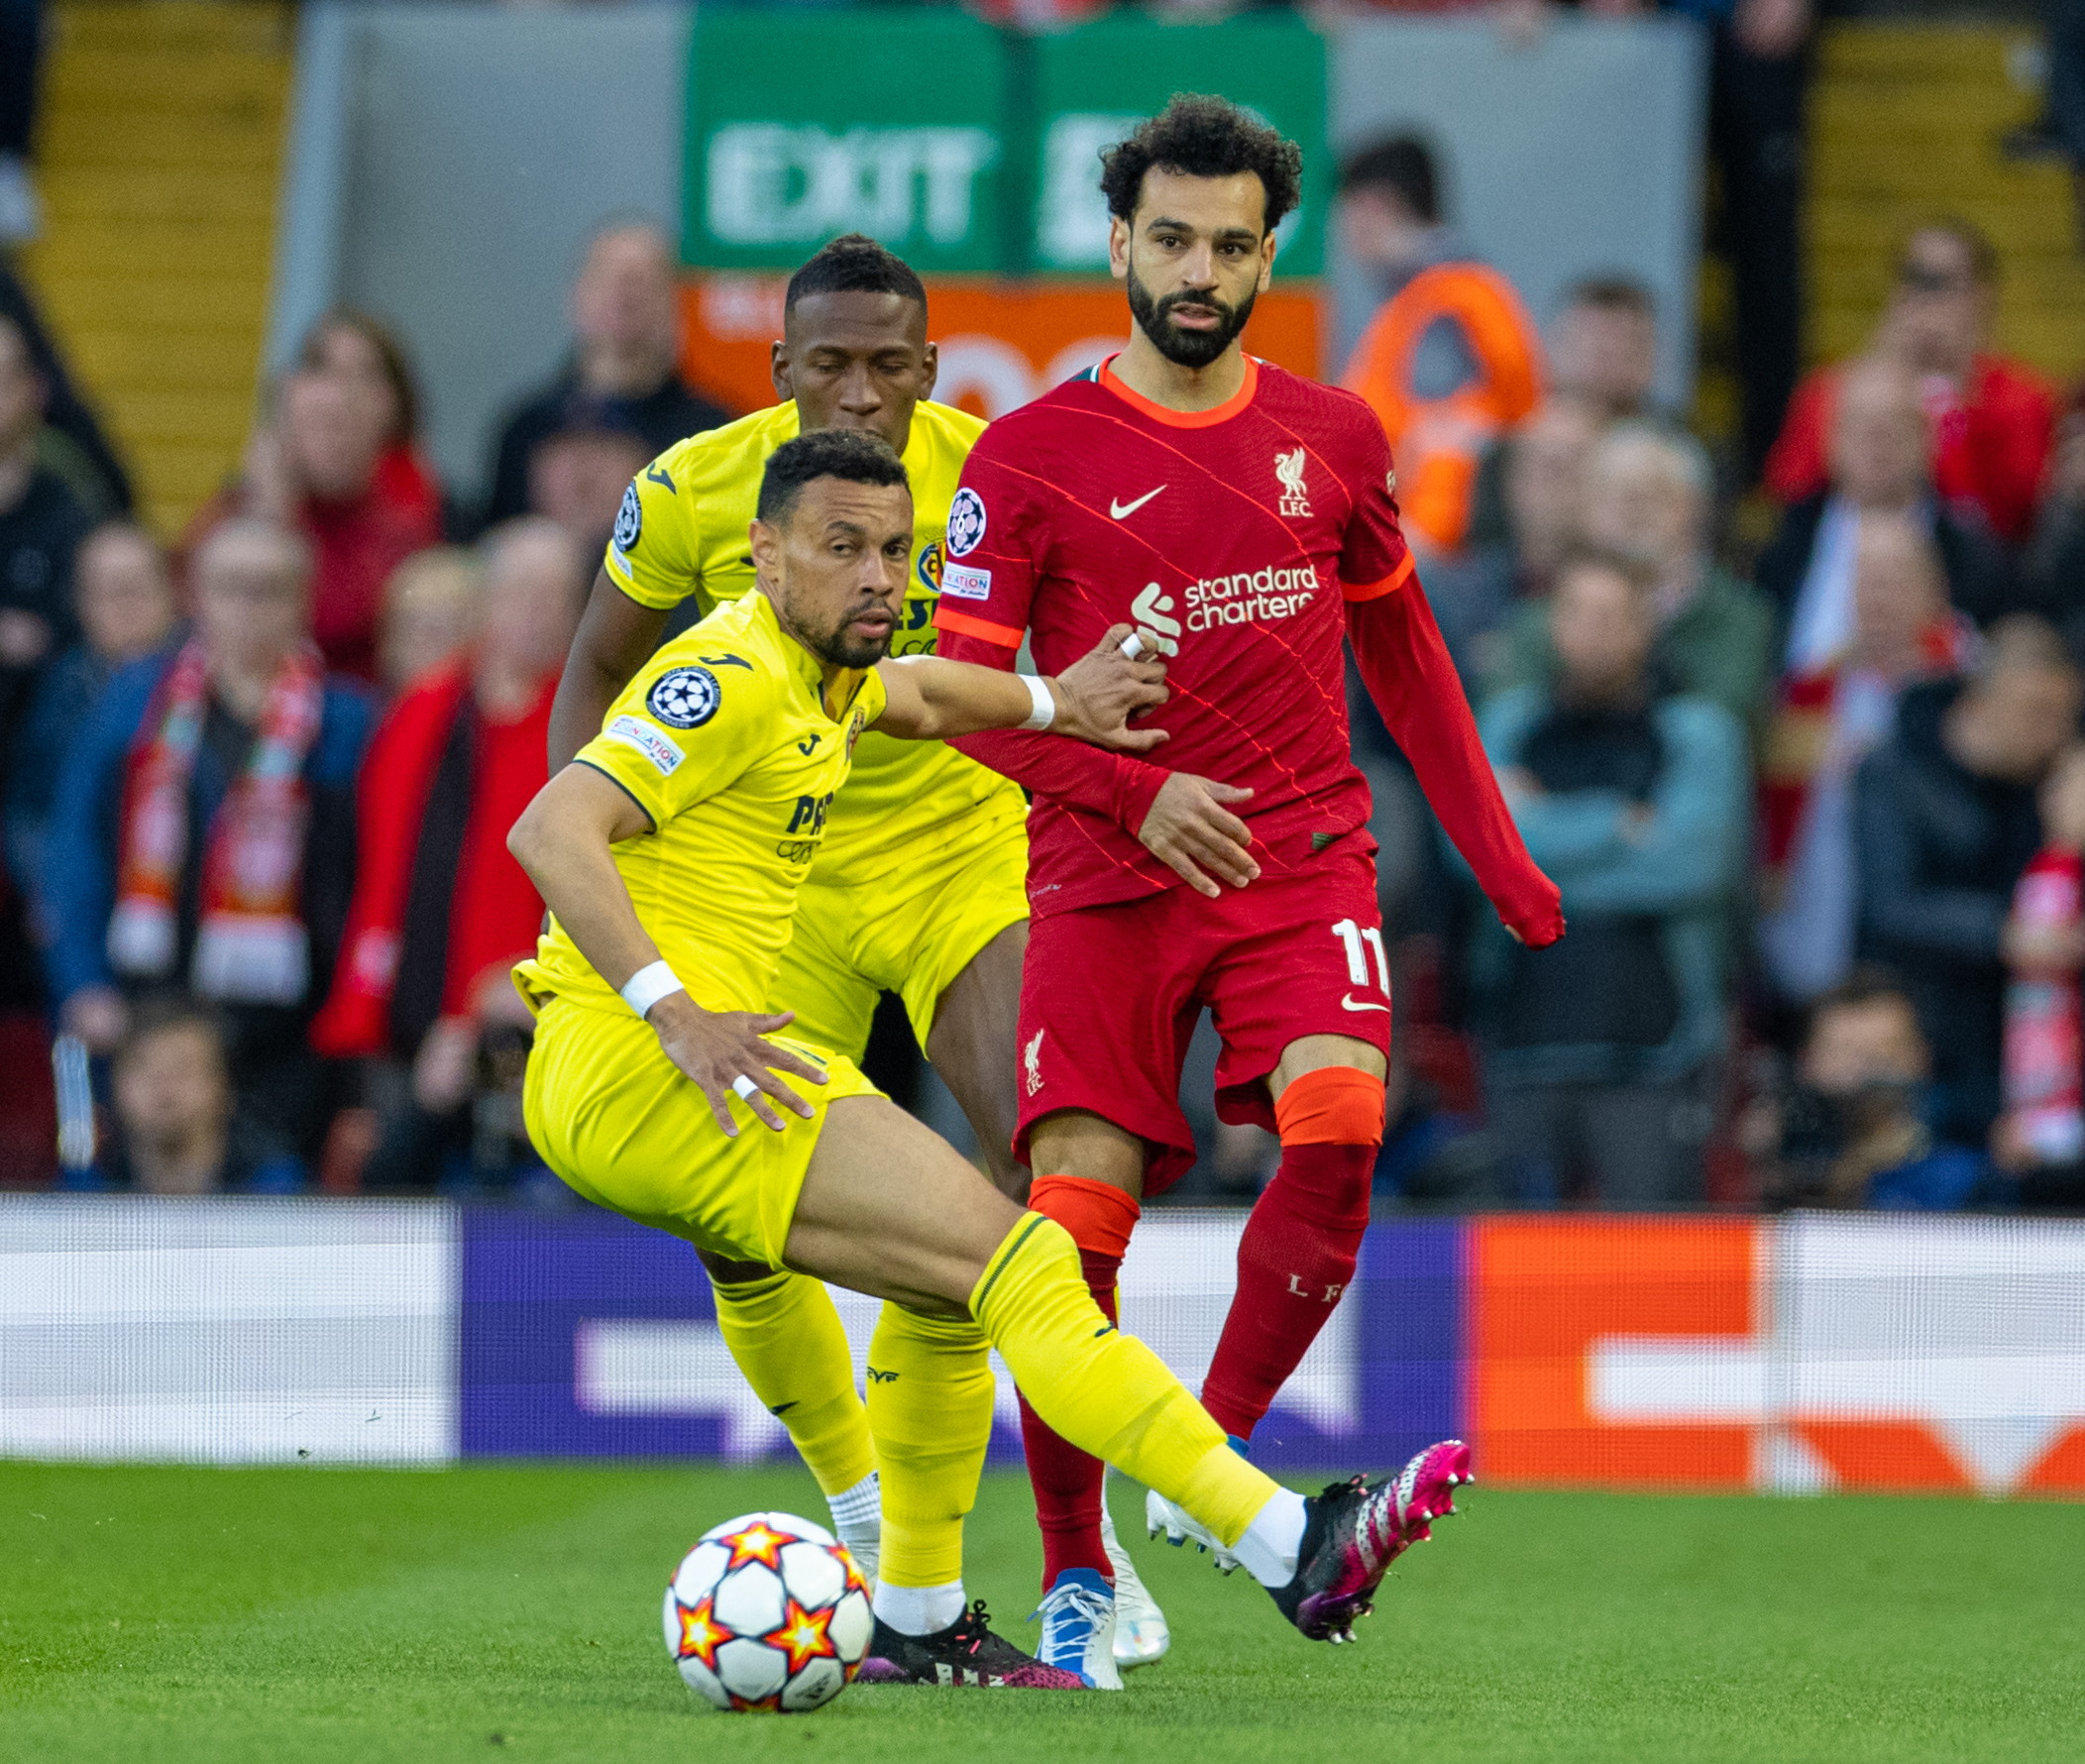 Champions League Semi-Final LIVE: Underdogs Villarreal hope to overturn 2-0 deficit on home turf, Follow Villarreal vs Liverpool 2nd Leg LIVE Streaming: Check Team News